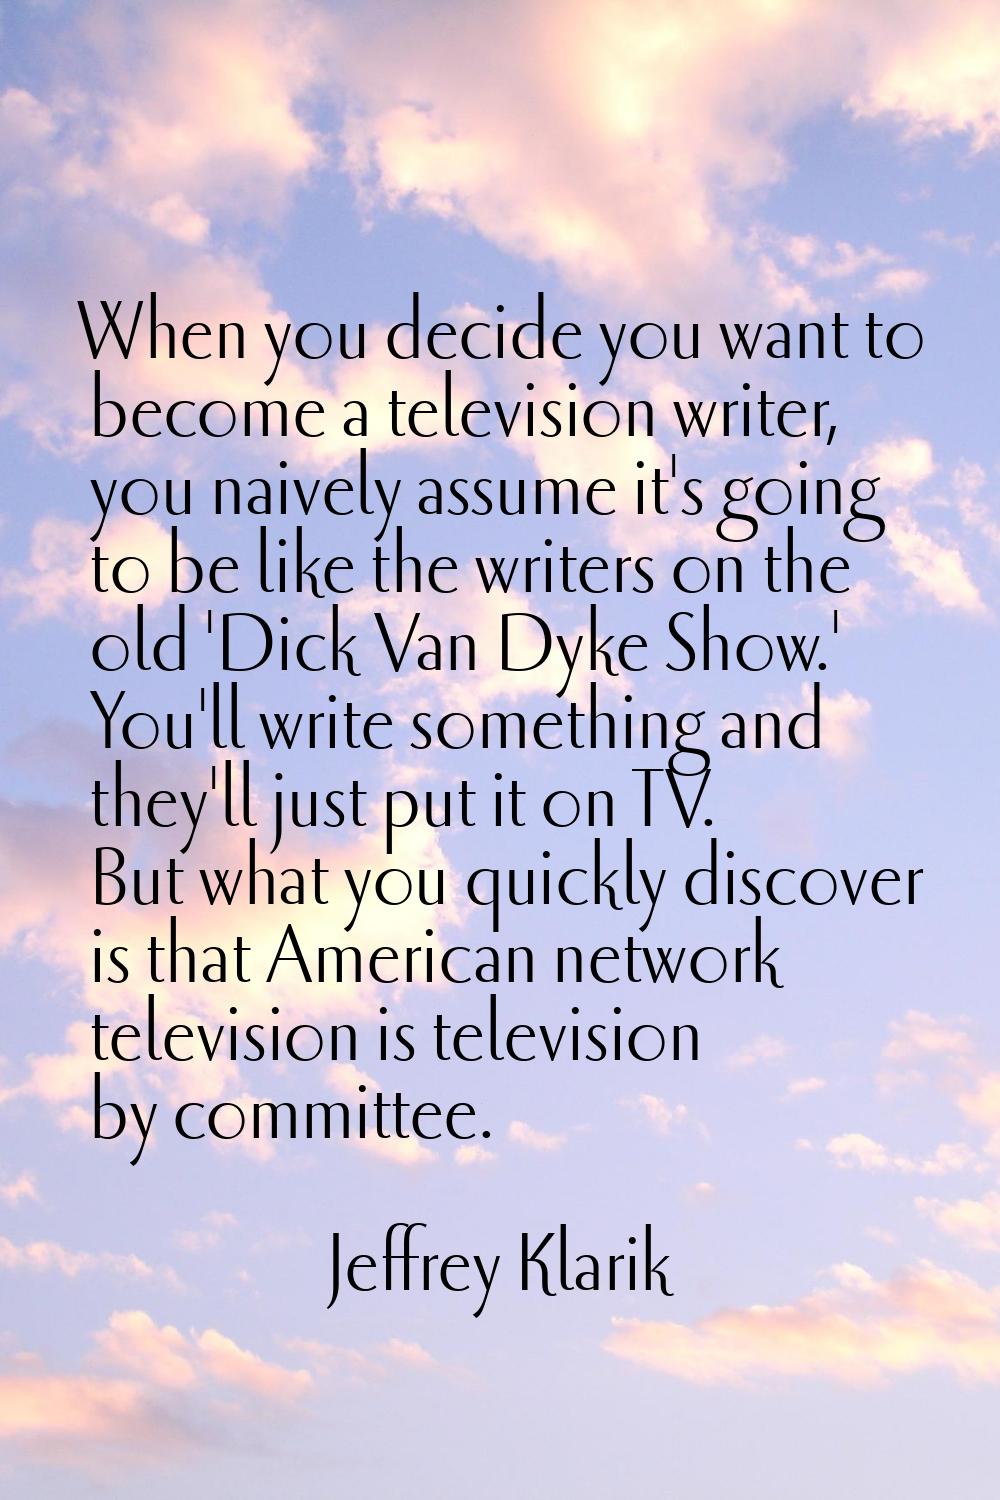 When you decide you want to become a television writer, you naively assume it's going to be like th